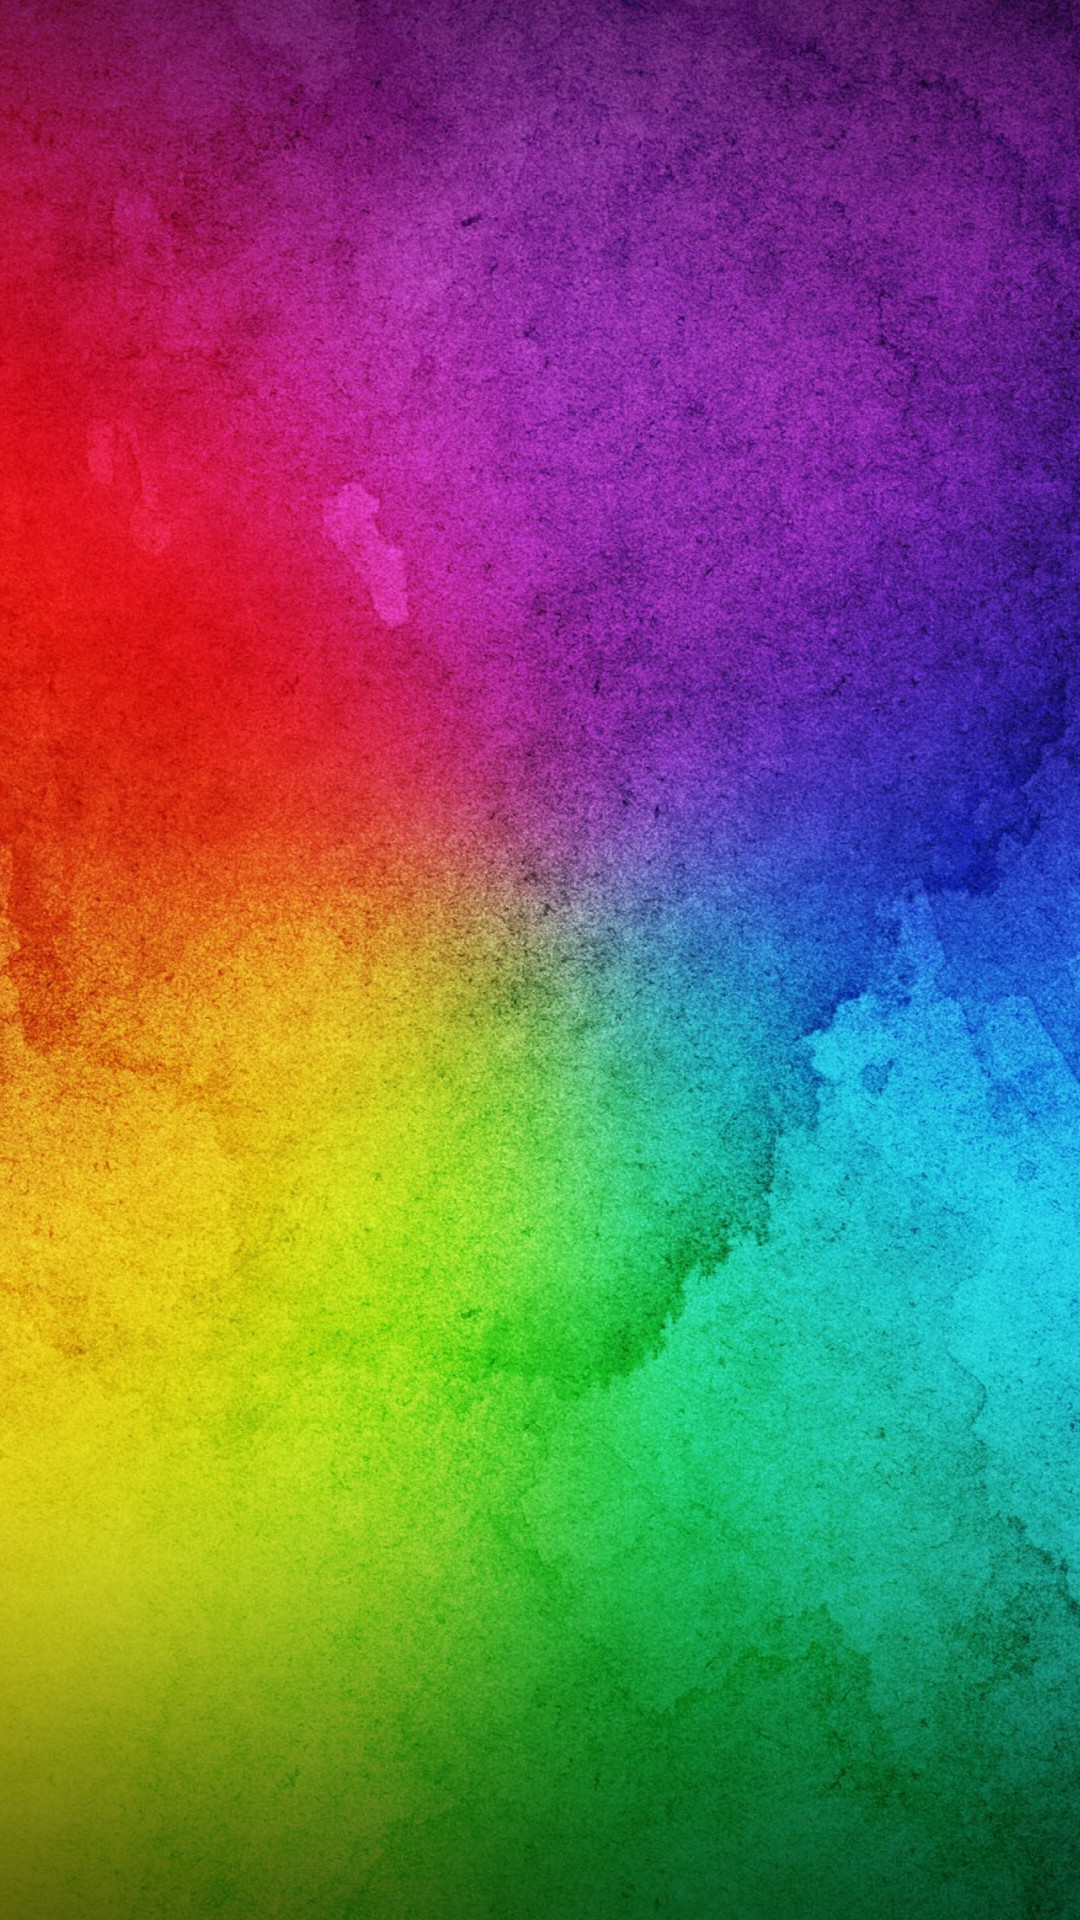 Android Wallpaper Rainbow Colors with image resolution 1080x1920 pixel. You can make this wallpaper for your Android backgrounds, Tablet, Smartphones Screensavers and Mobile Phone Lock Screen